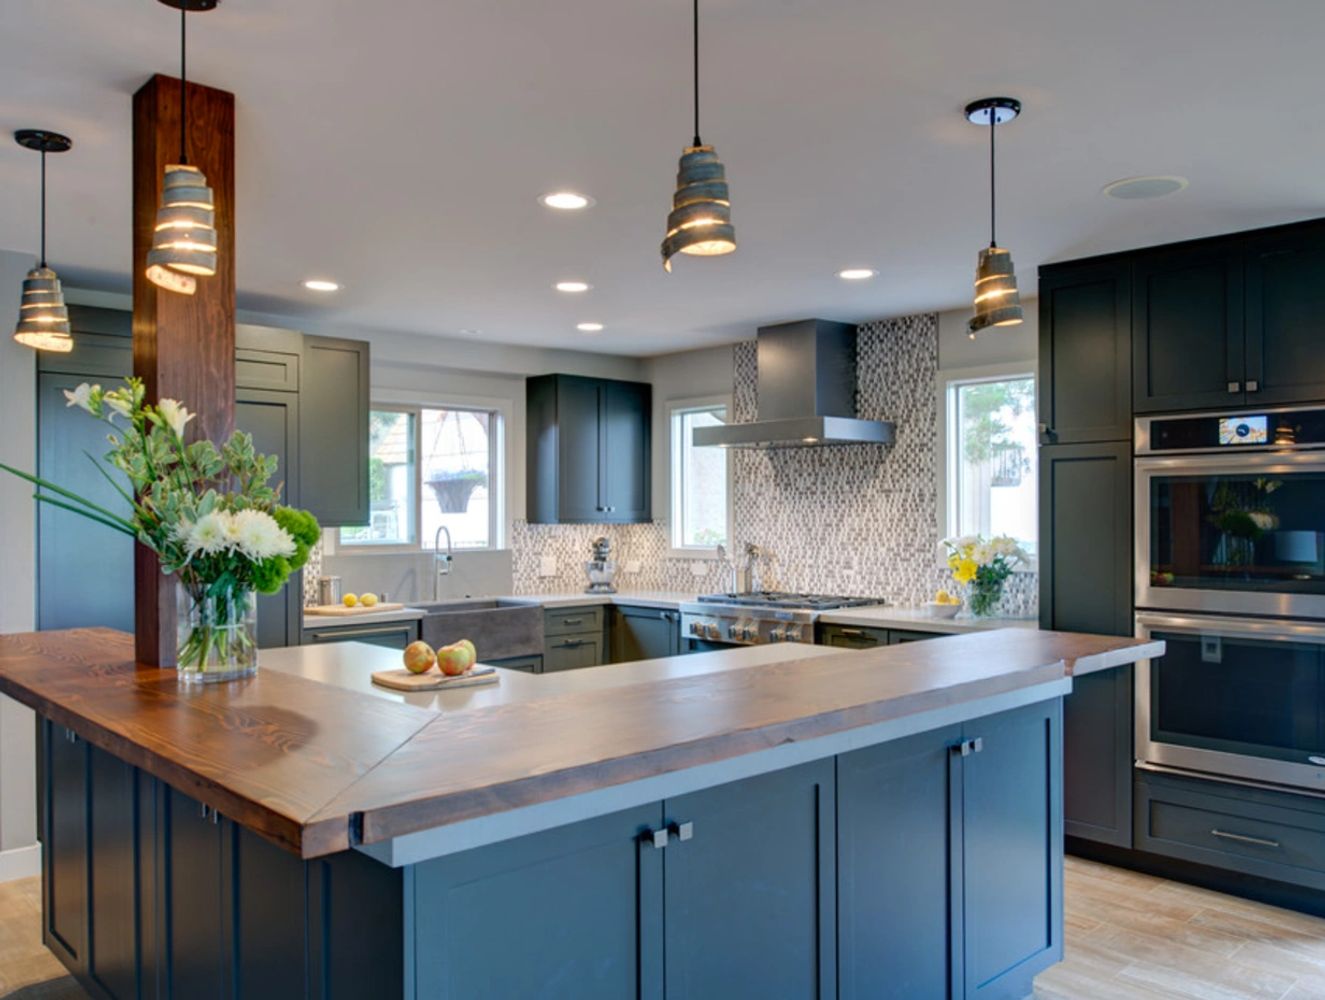 Transforming  your kitchen to a Rustic industrial look- Belmont